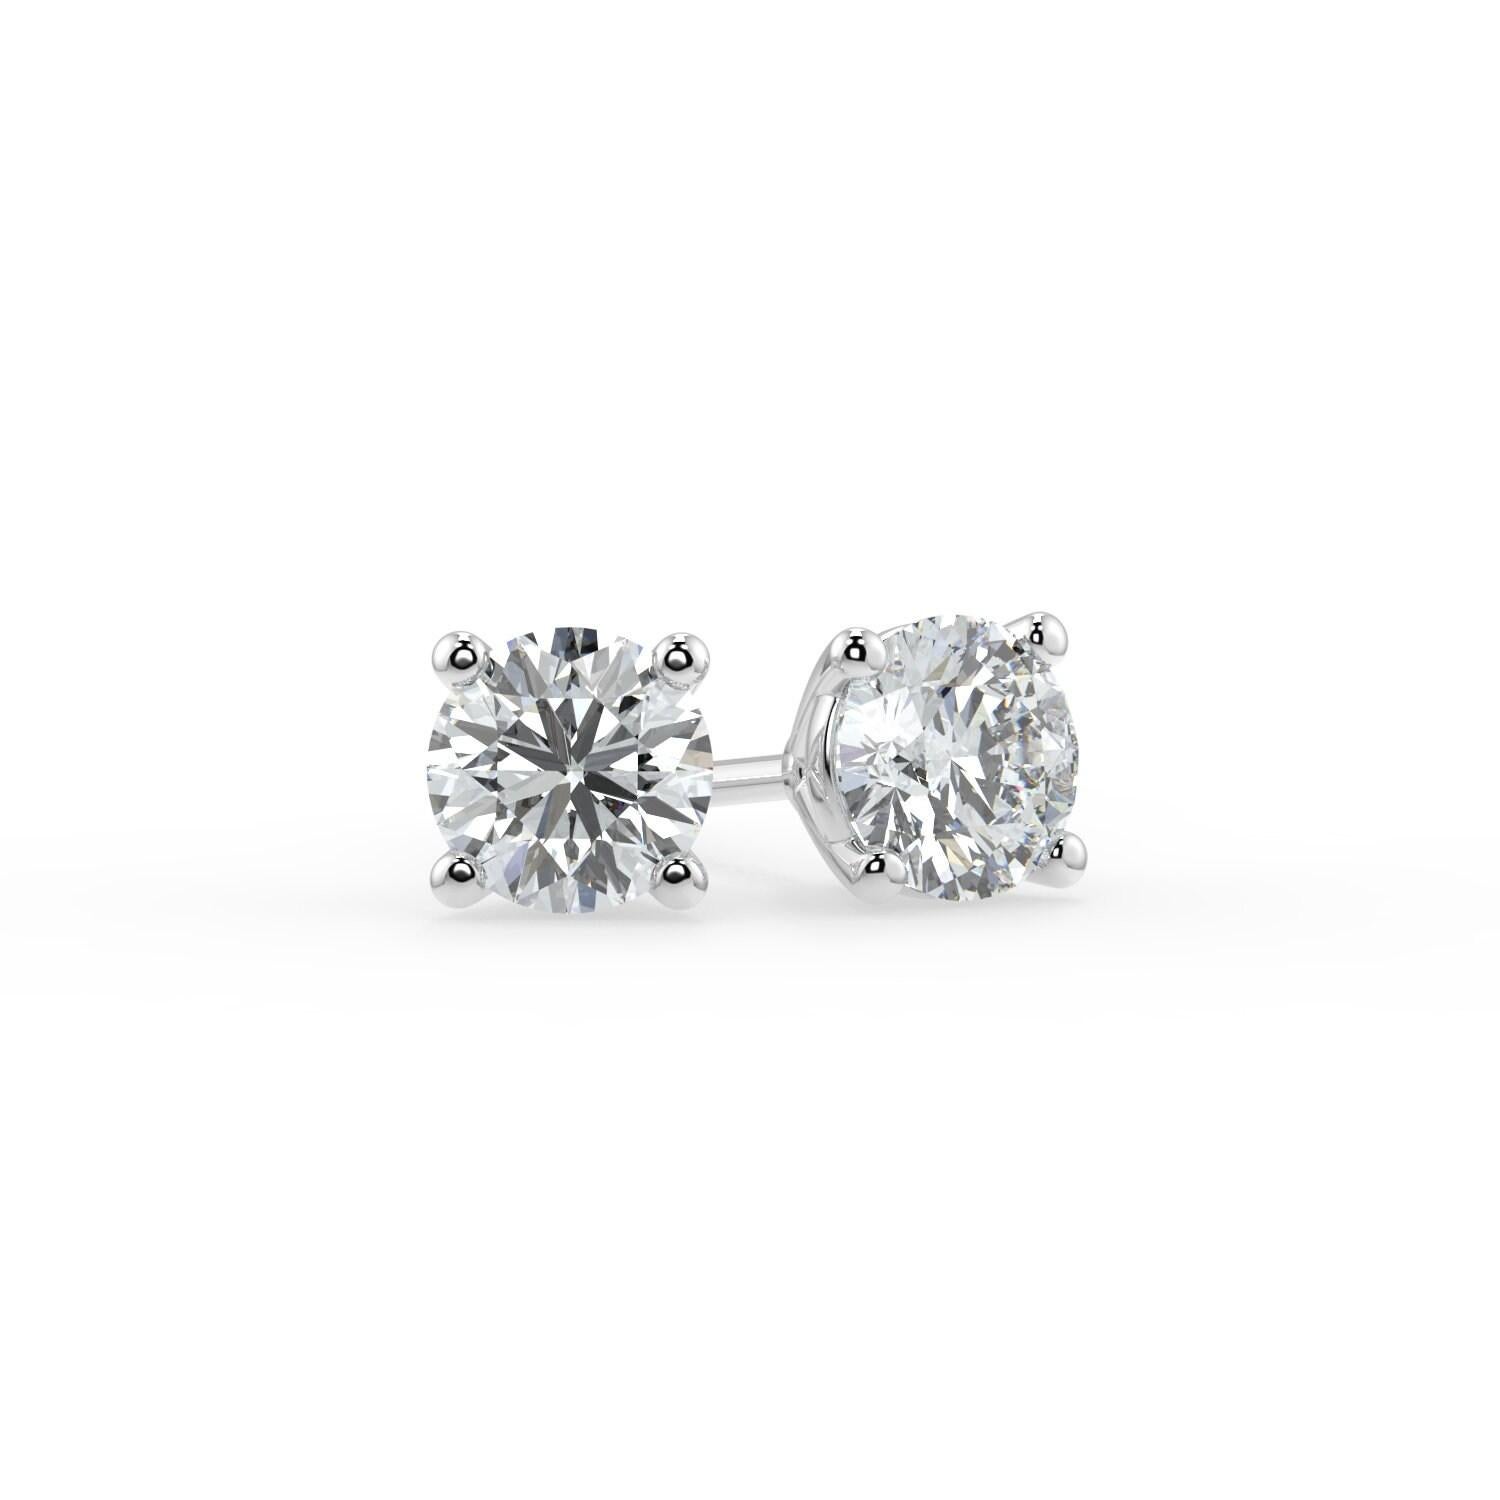 0.25Ct Natural White Diamond SI Clarity Round Shape Solitaire 4 Prong Martini Style  Unisex Studs with Butterfly Pushbacks 14K White Gold 

Specifications:
Metal: 14k White Gold 
Diamond Shape: Round
Natural Diamond carat weight: 0.25 CTW 
Diamond